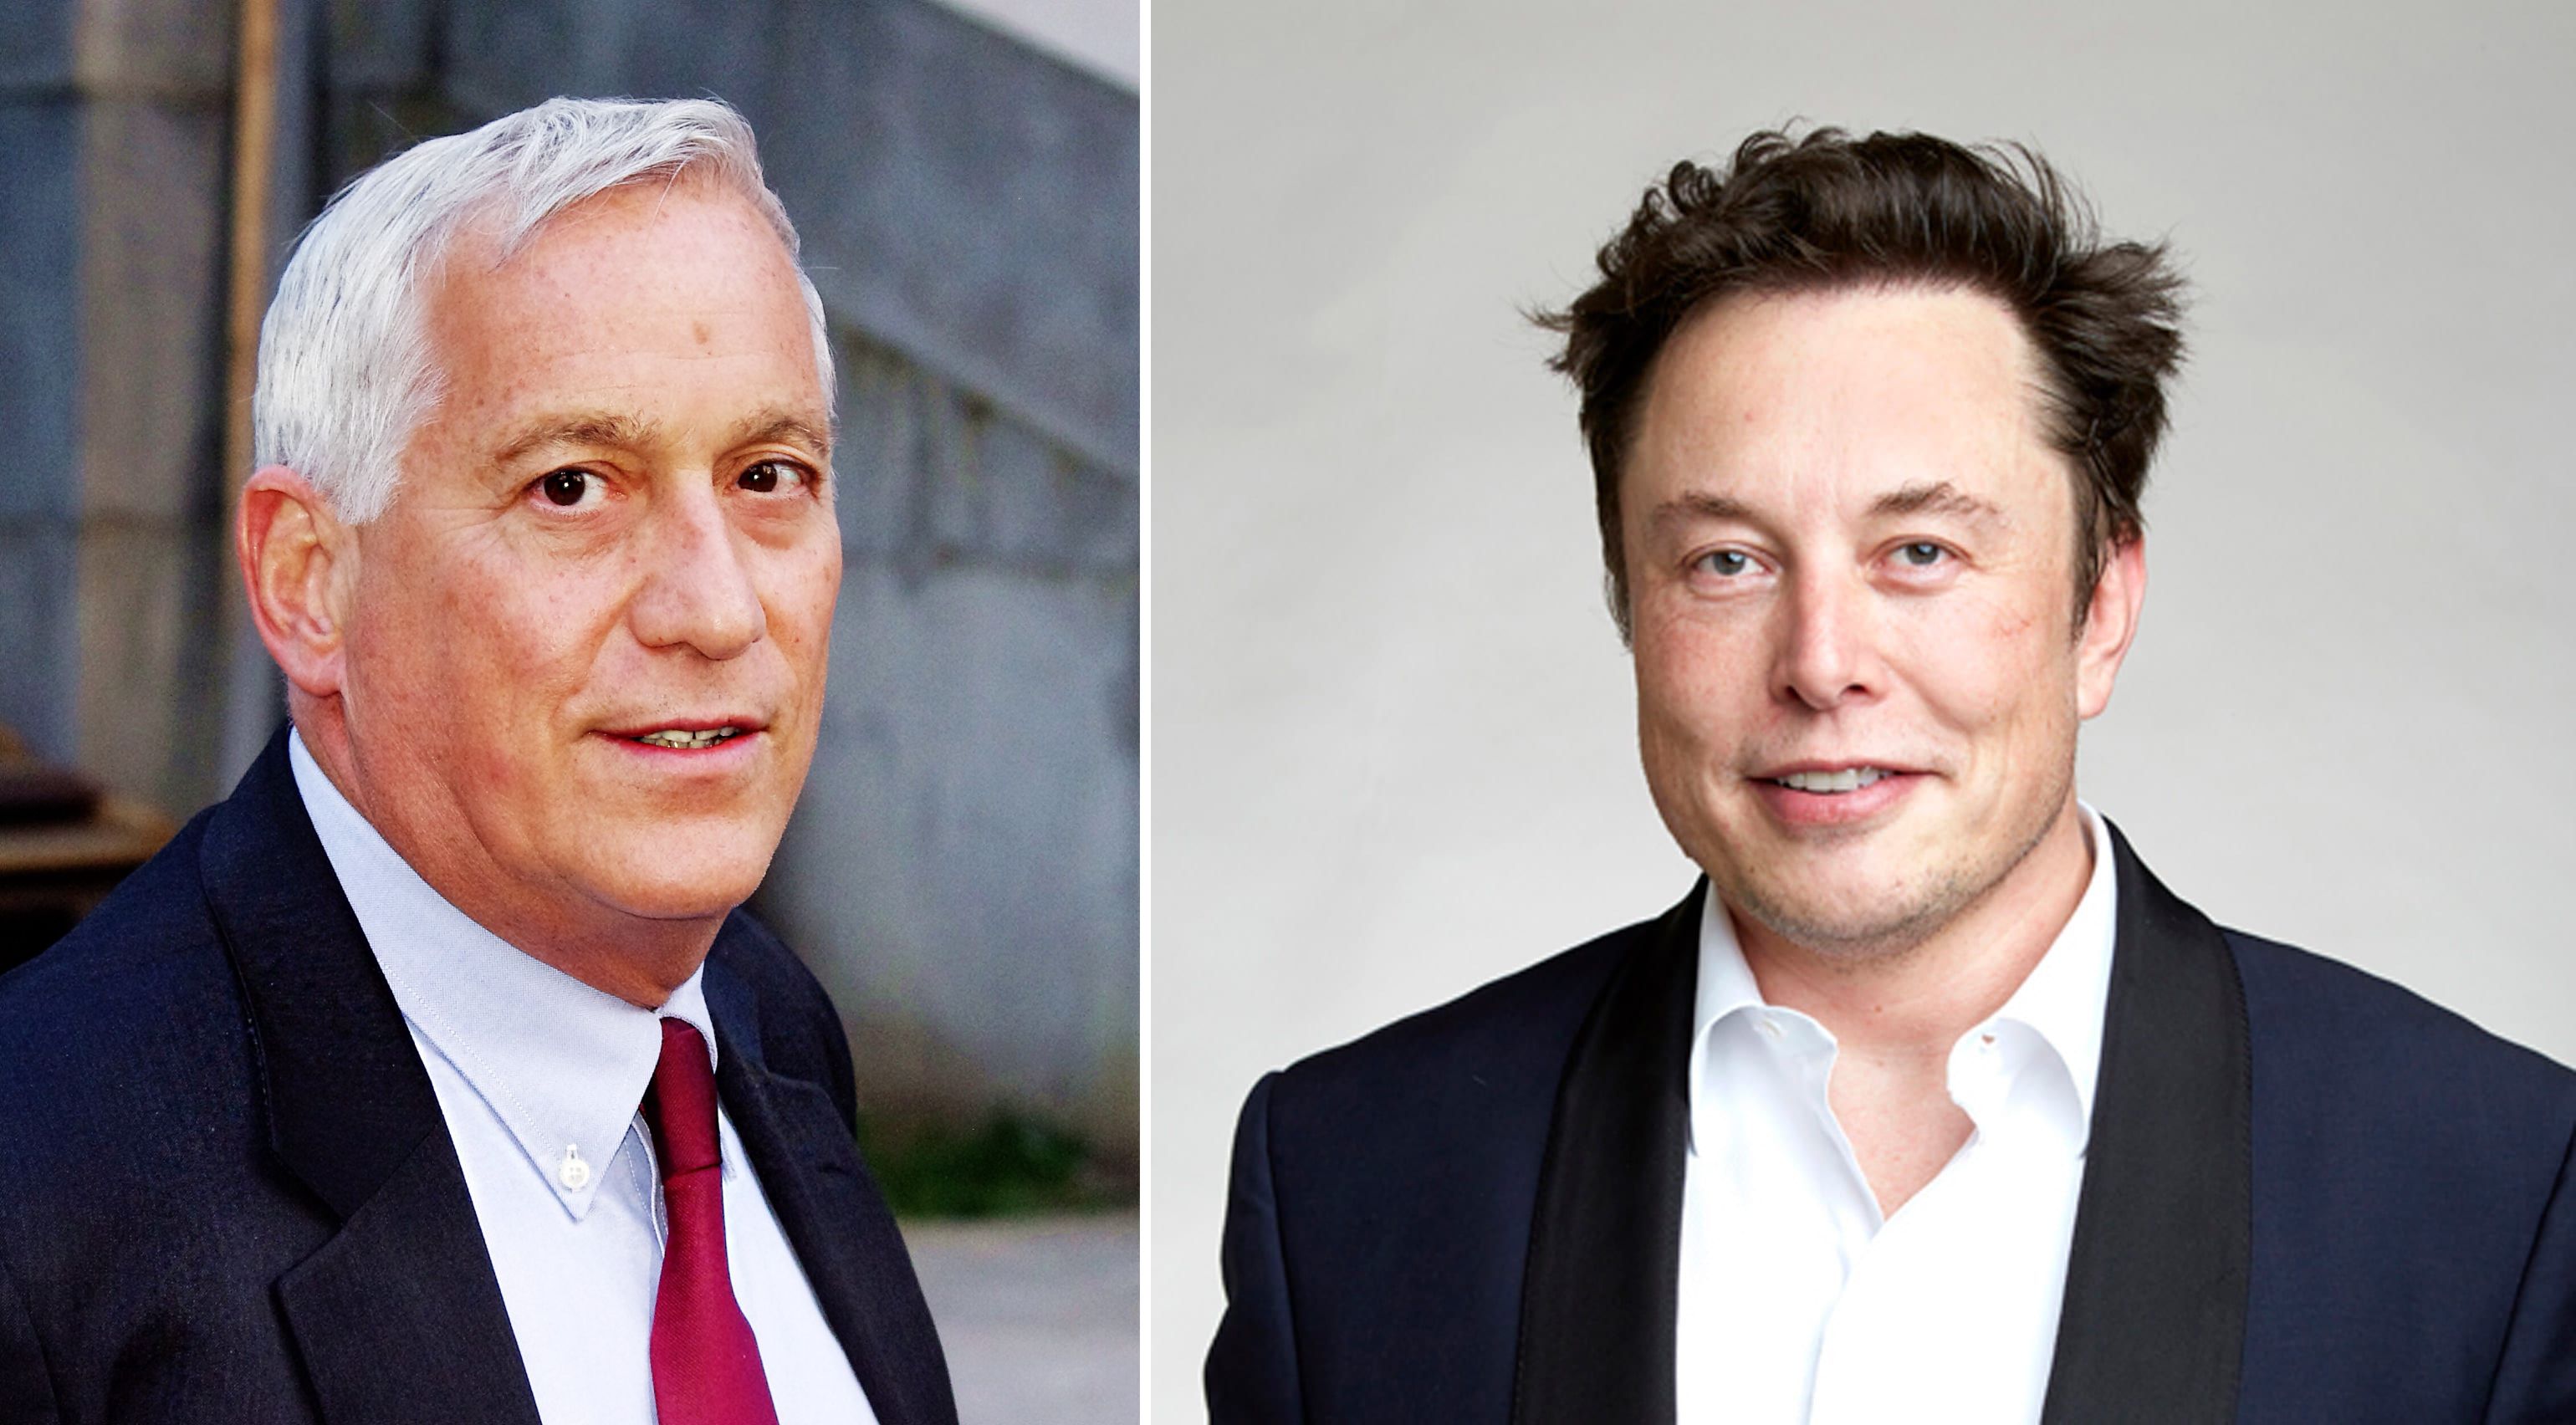 Walter Isaacson to Write Biography About Elon Musk